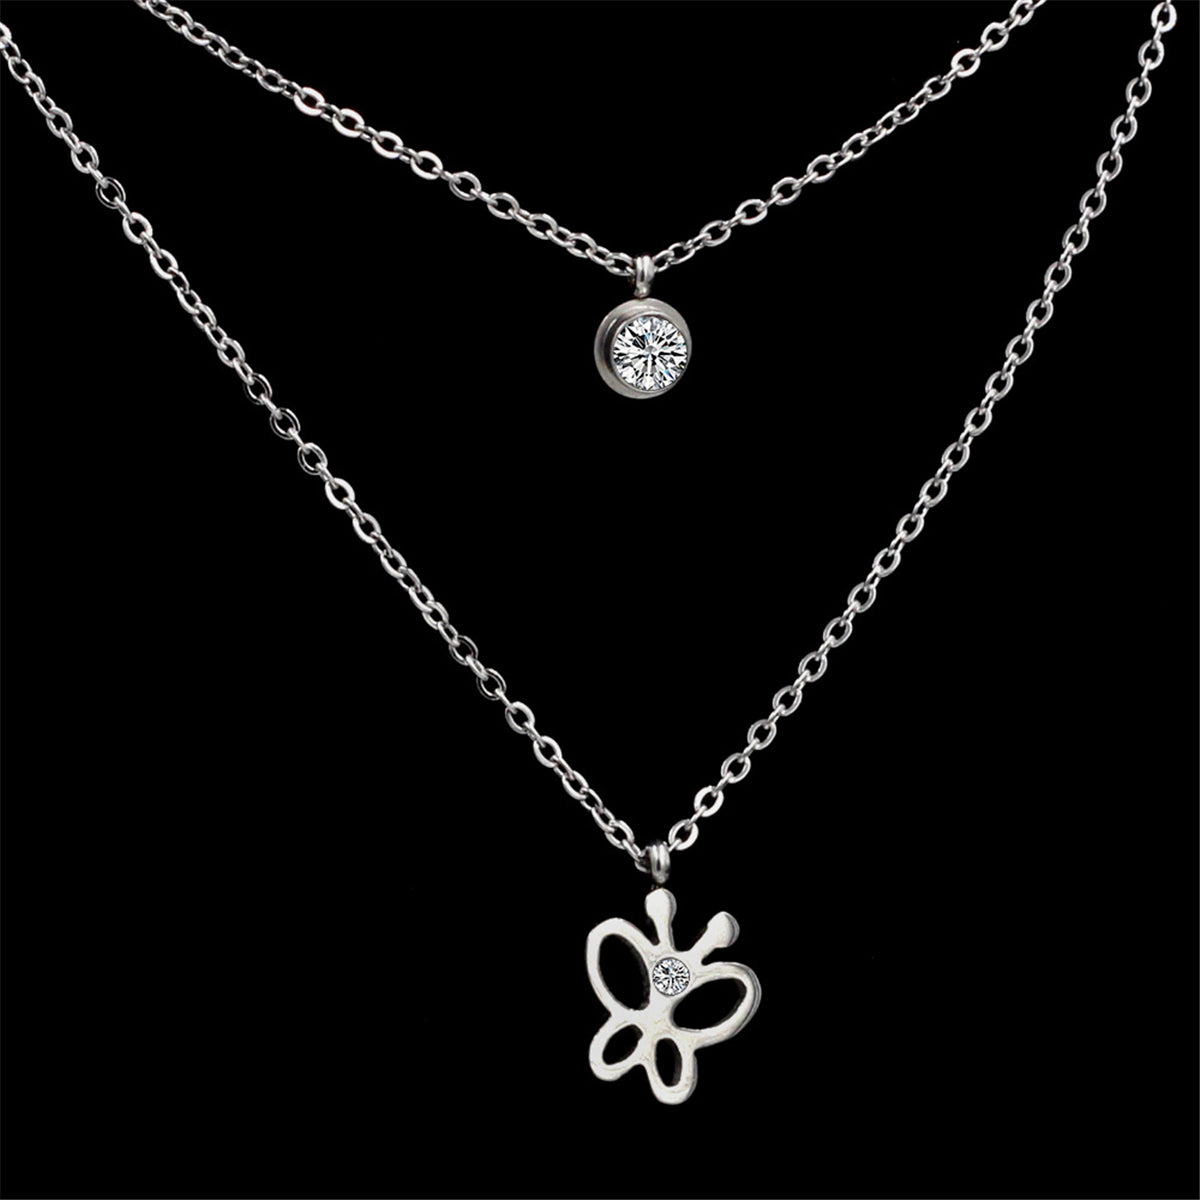 Cubic Zirconia & Silver-Plated Butterfly Layered Pendant Necklace